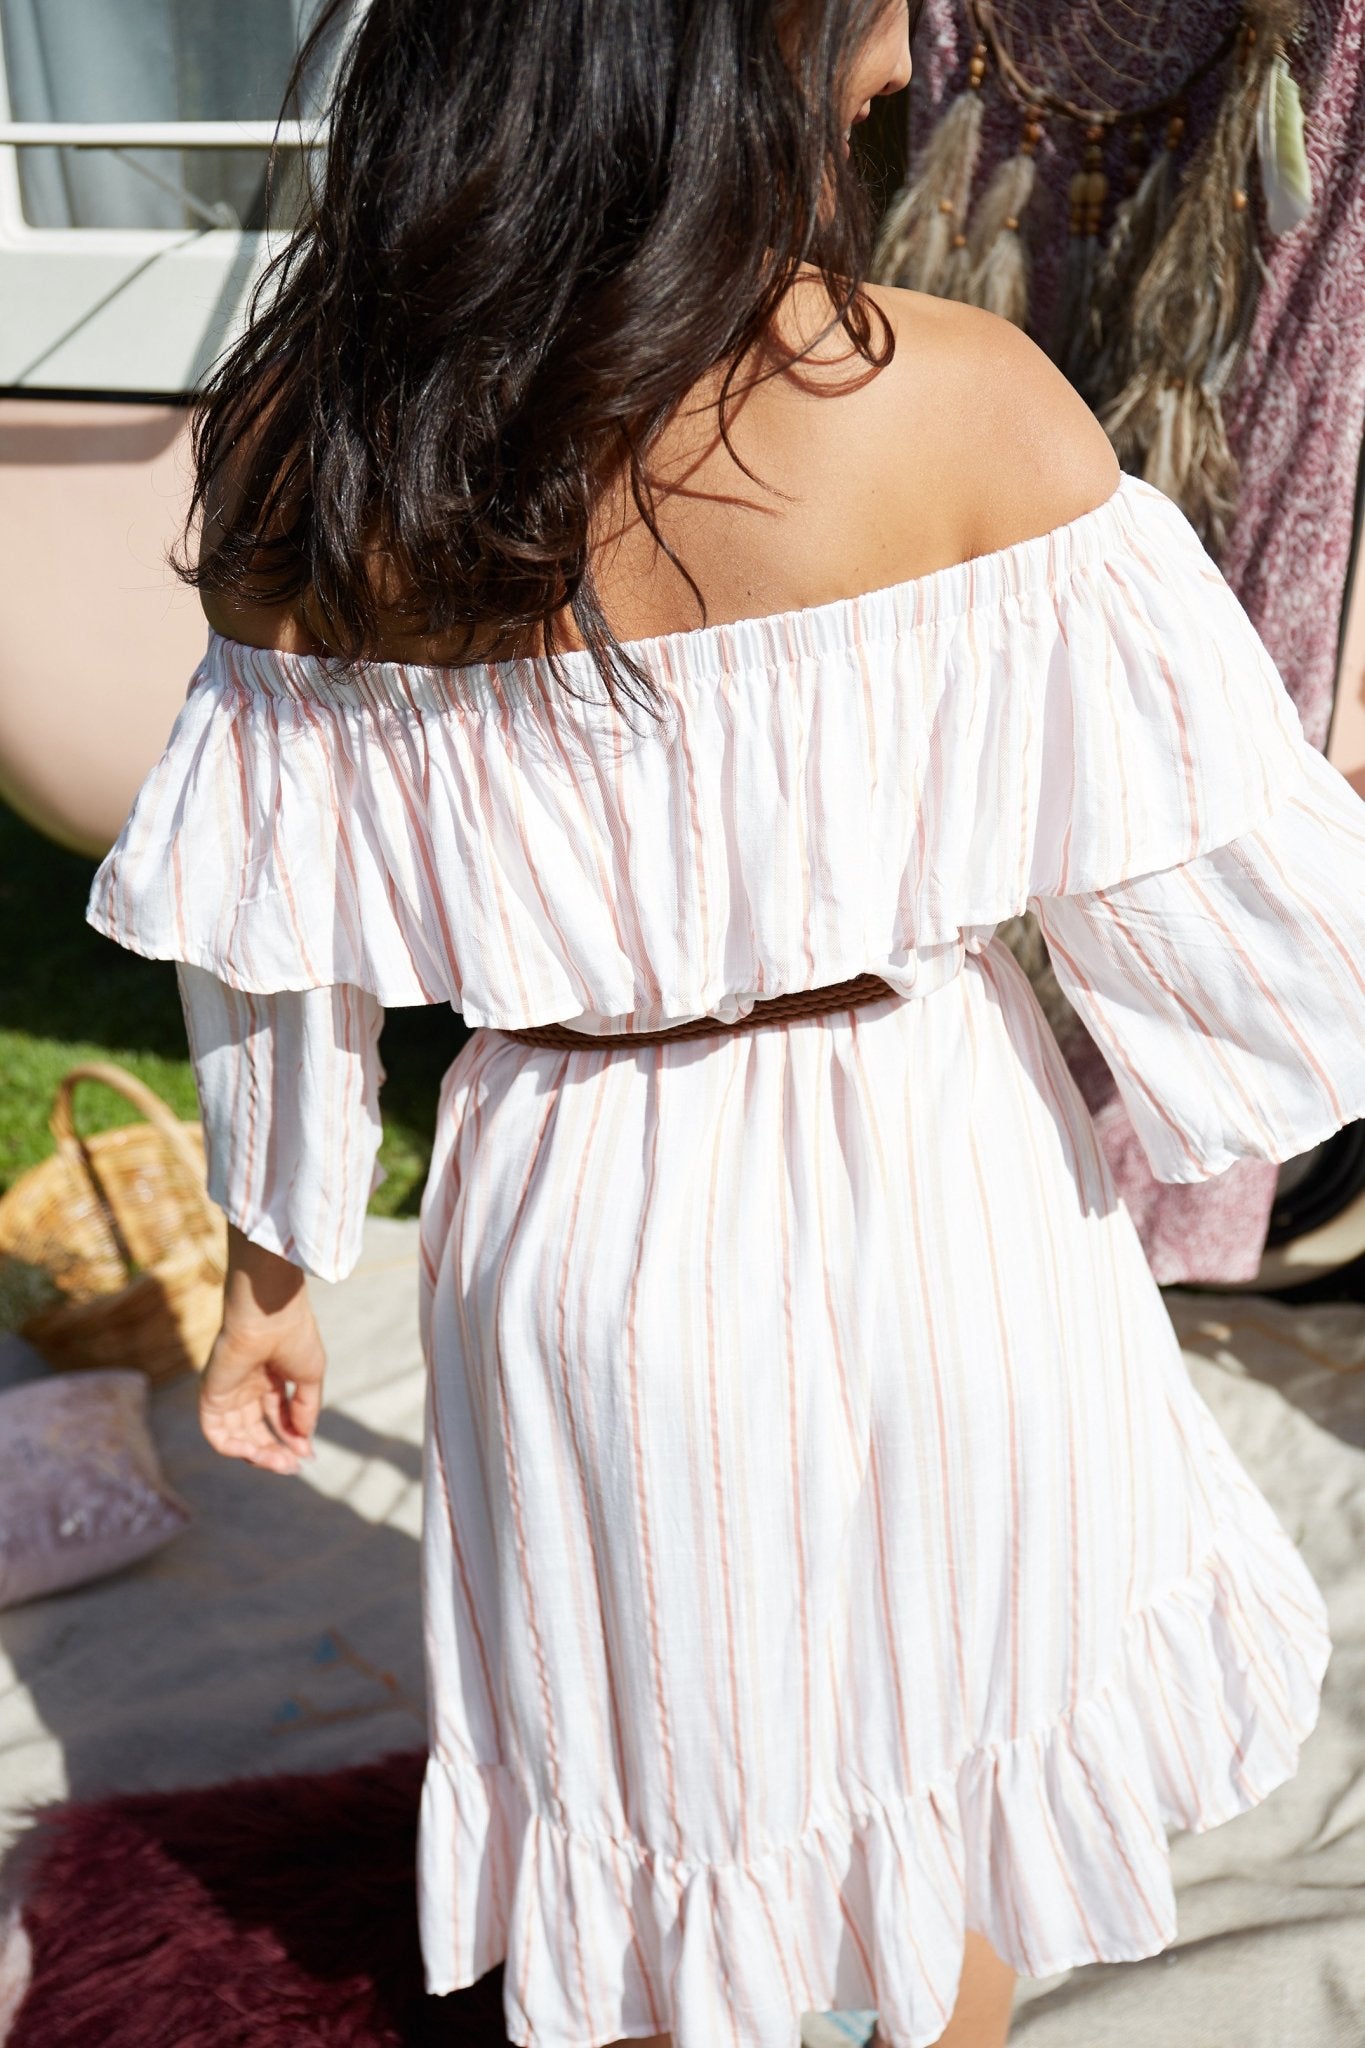 KIIK Luxe Candy Stripe Dress / Top with Ruffle Shoulder in Blush - Hey Sara